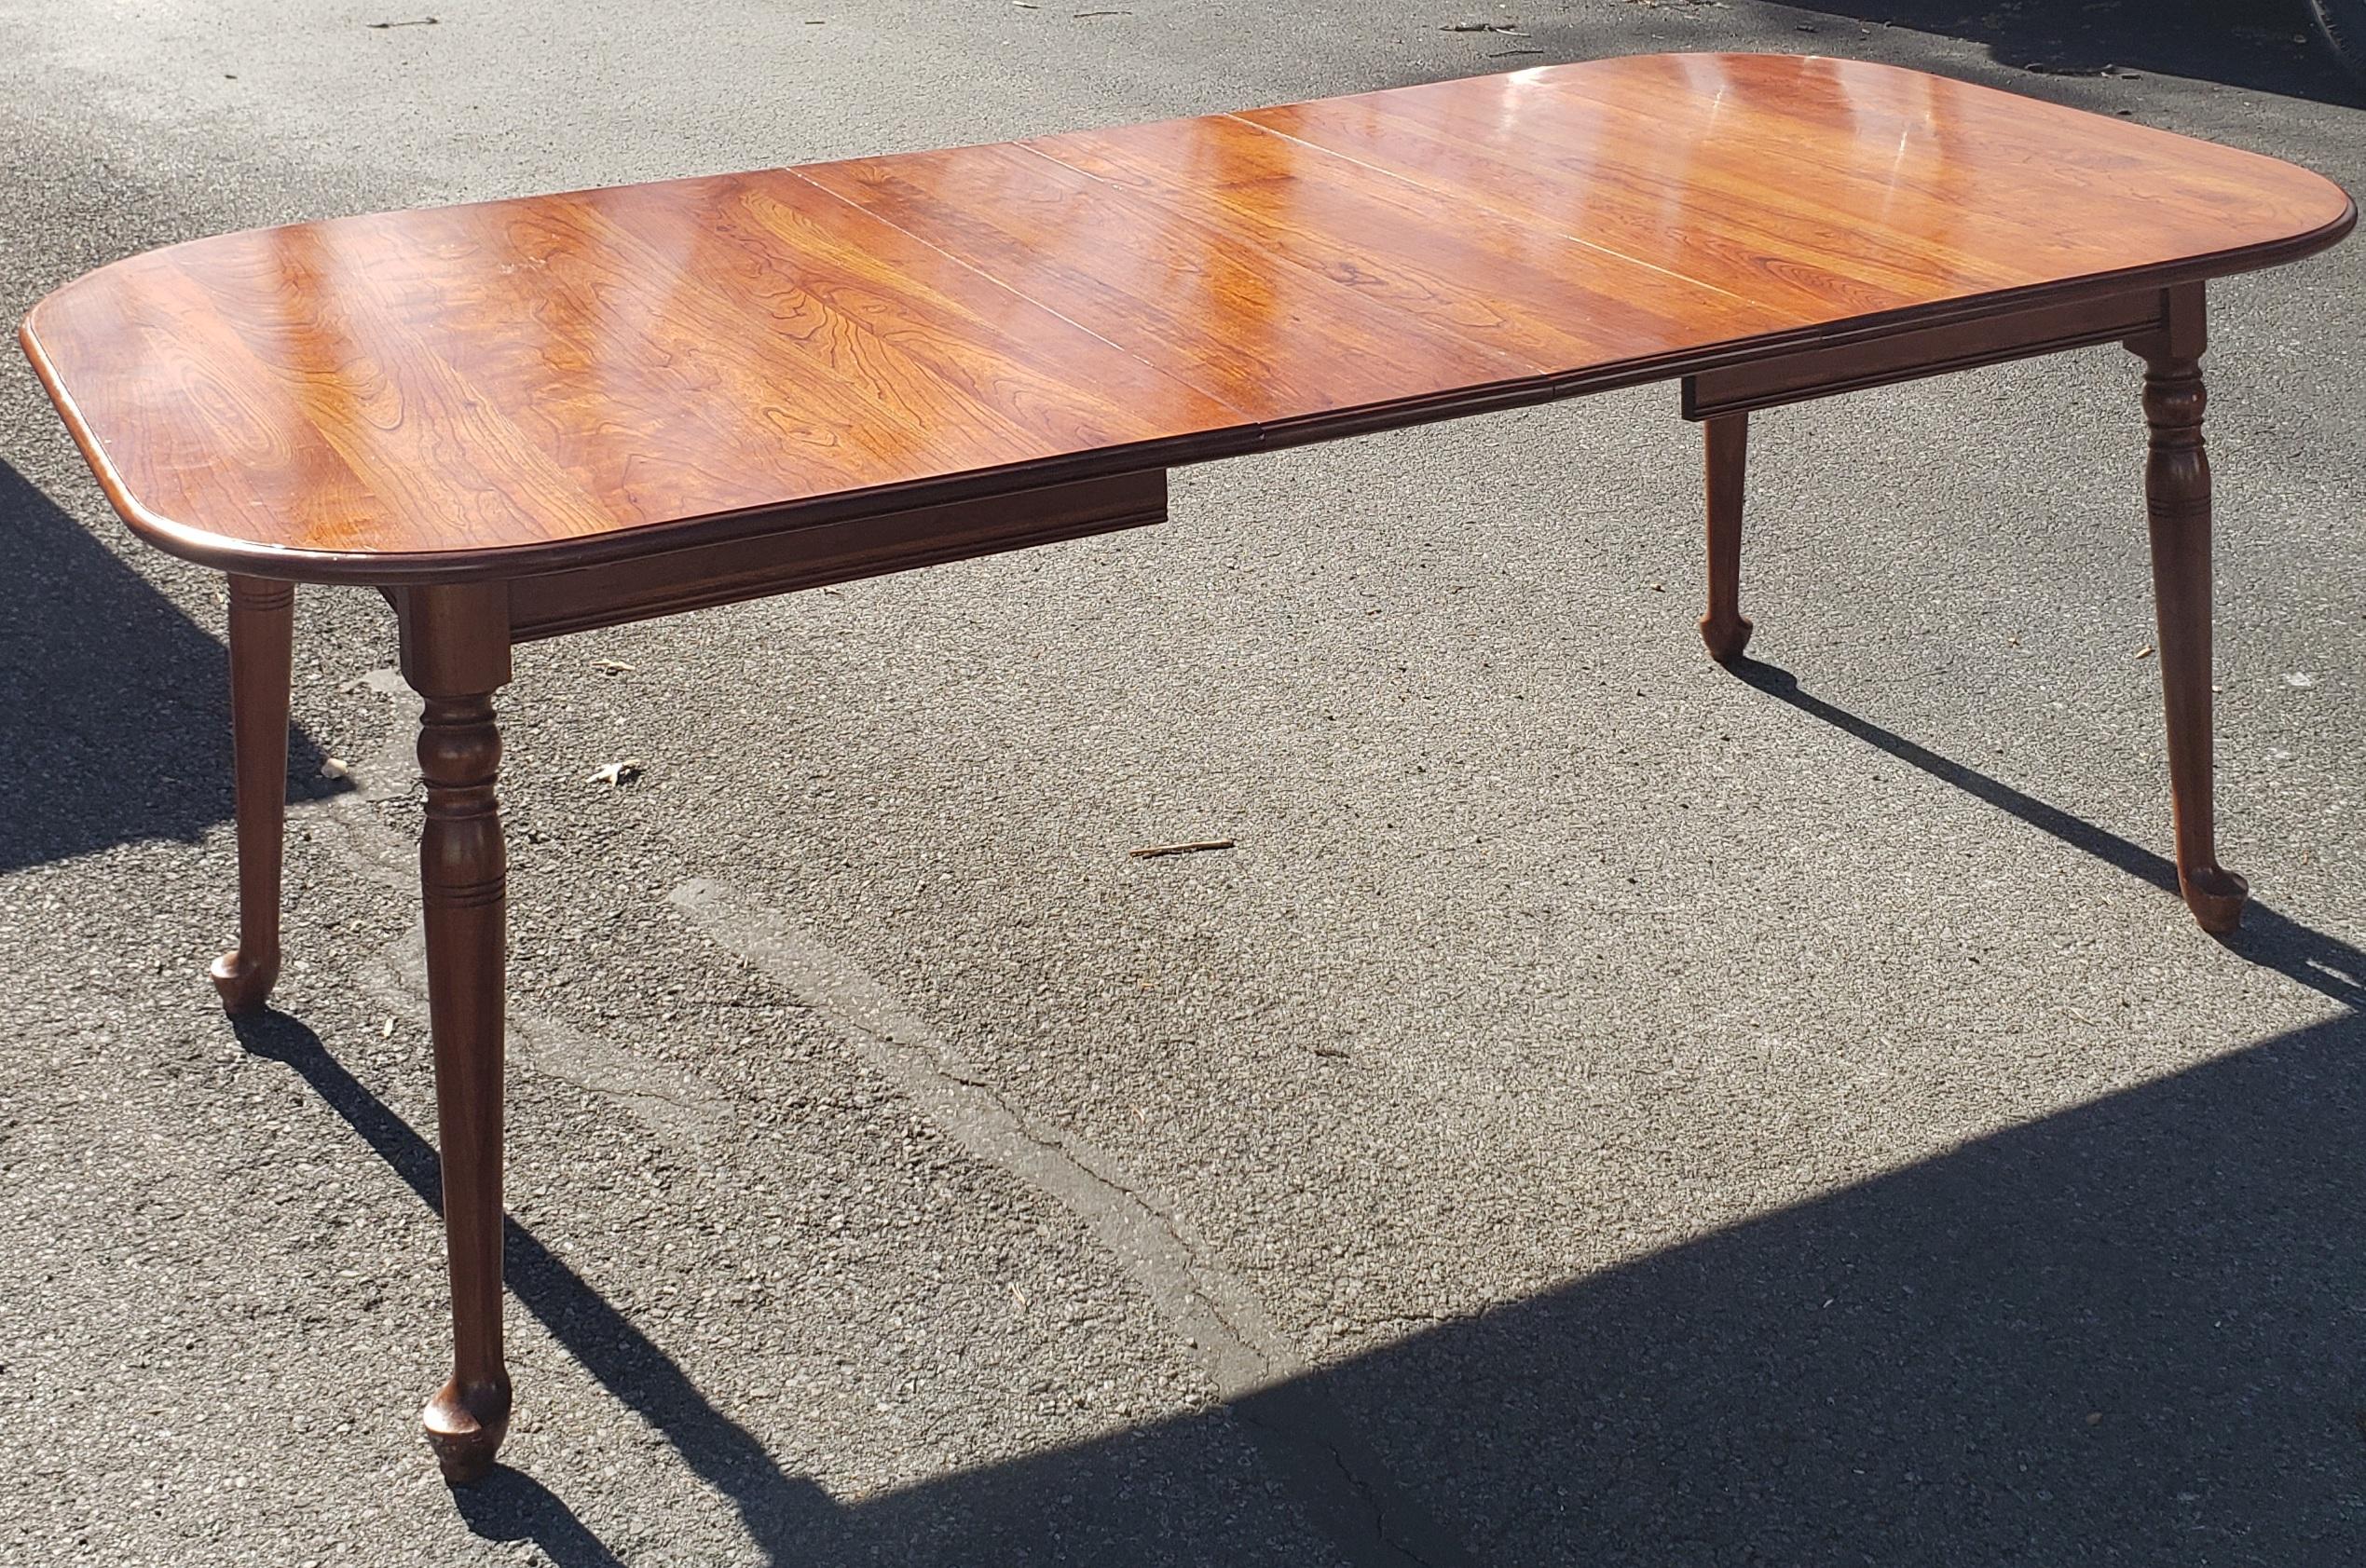 Varnished Pennsylvania House American Classical Cherry Extention Dining Table with Pads For Sale